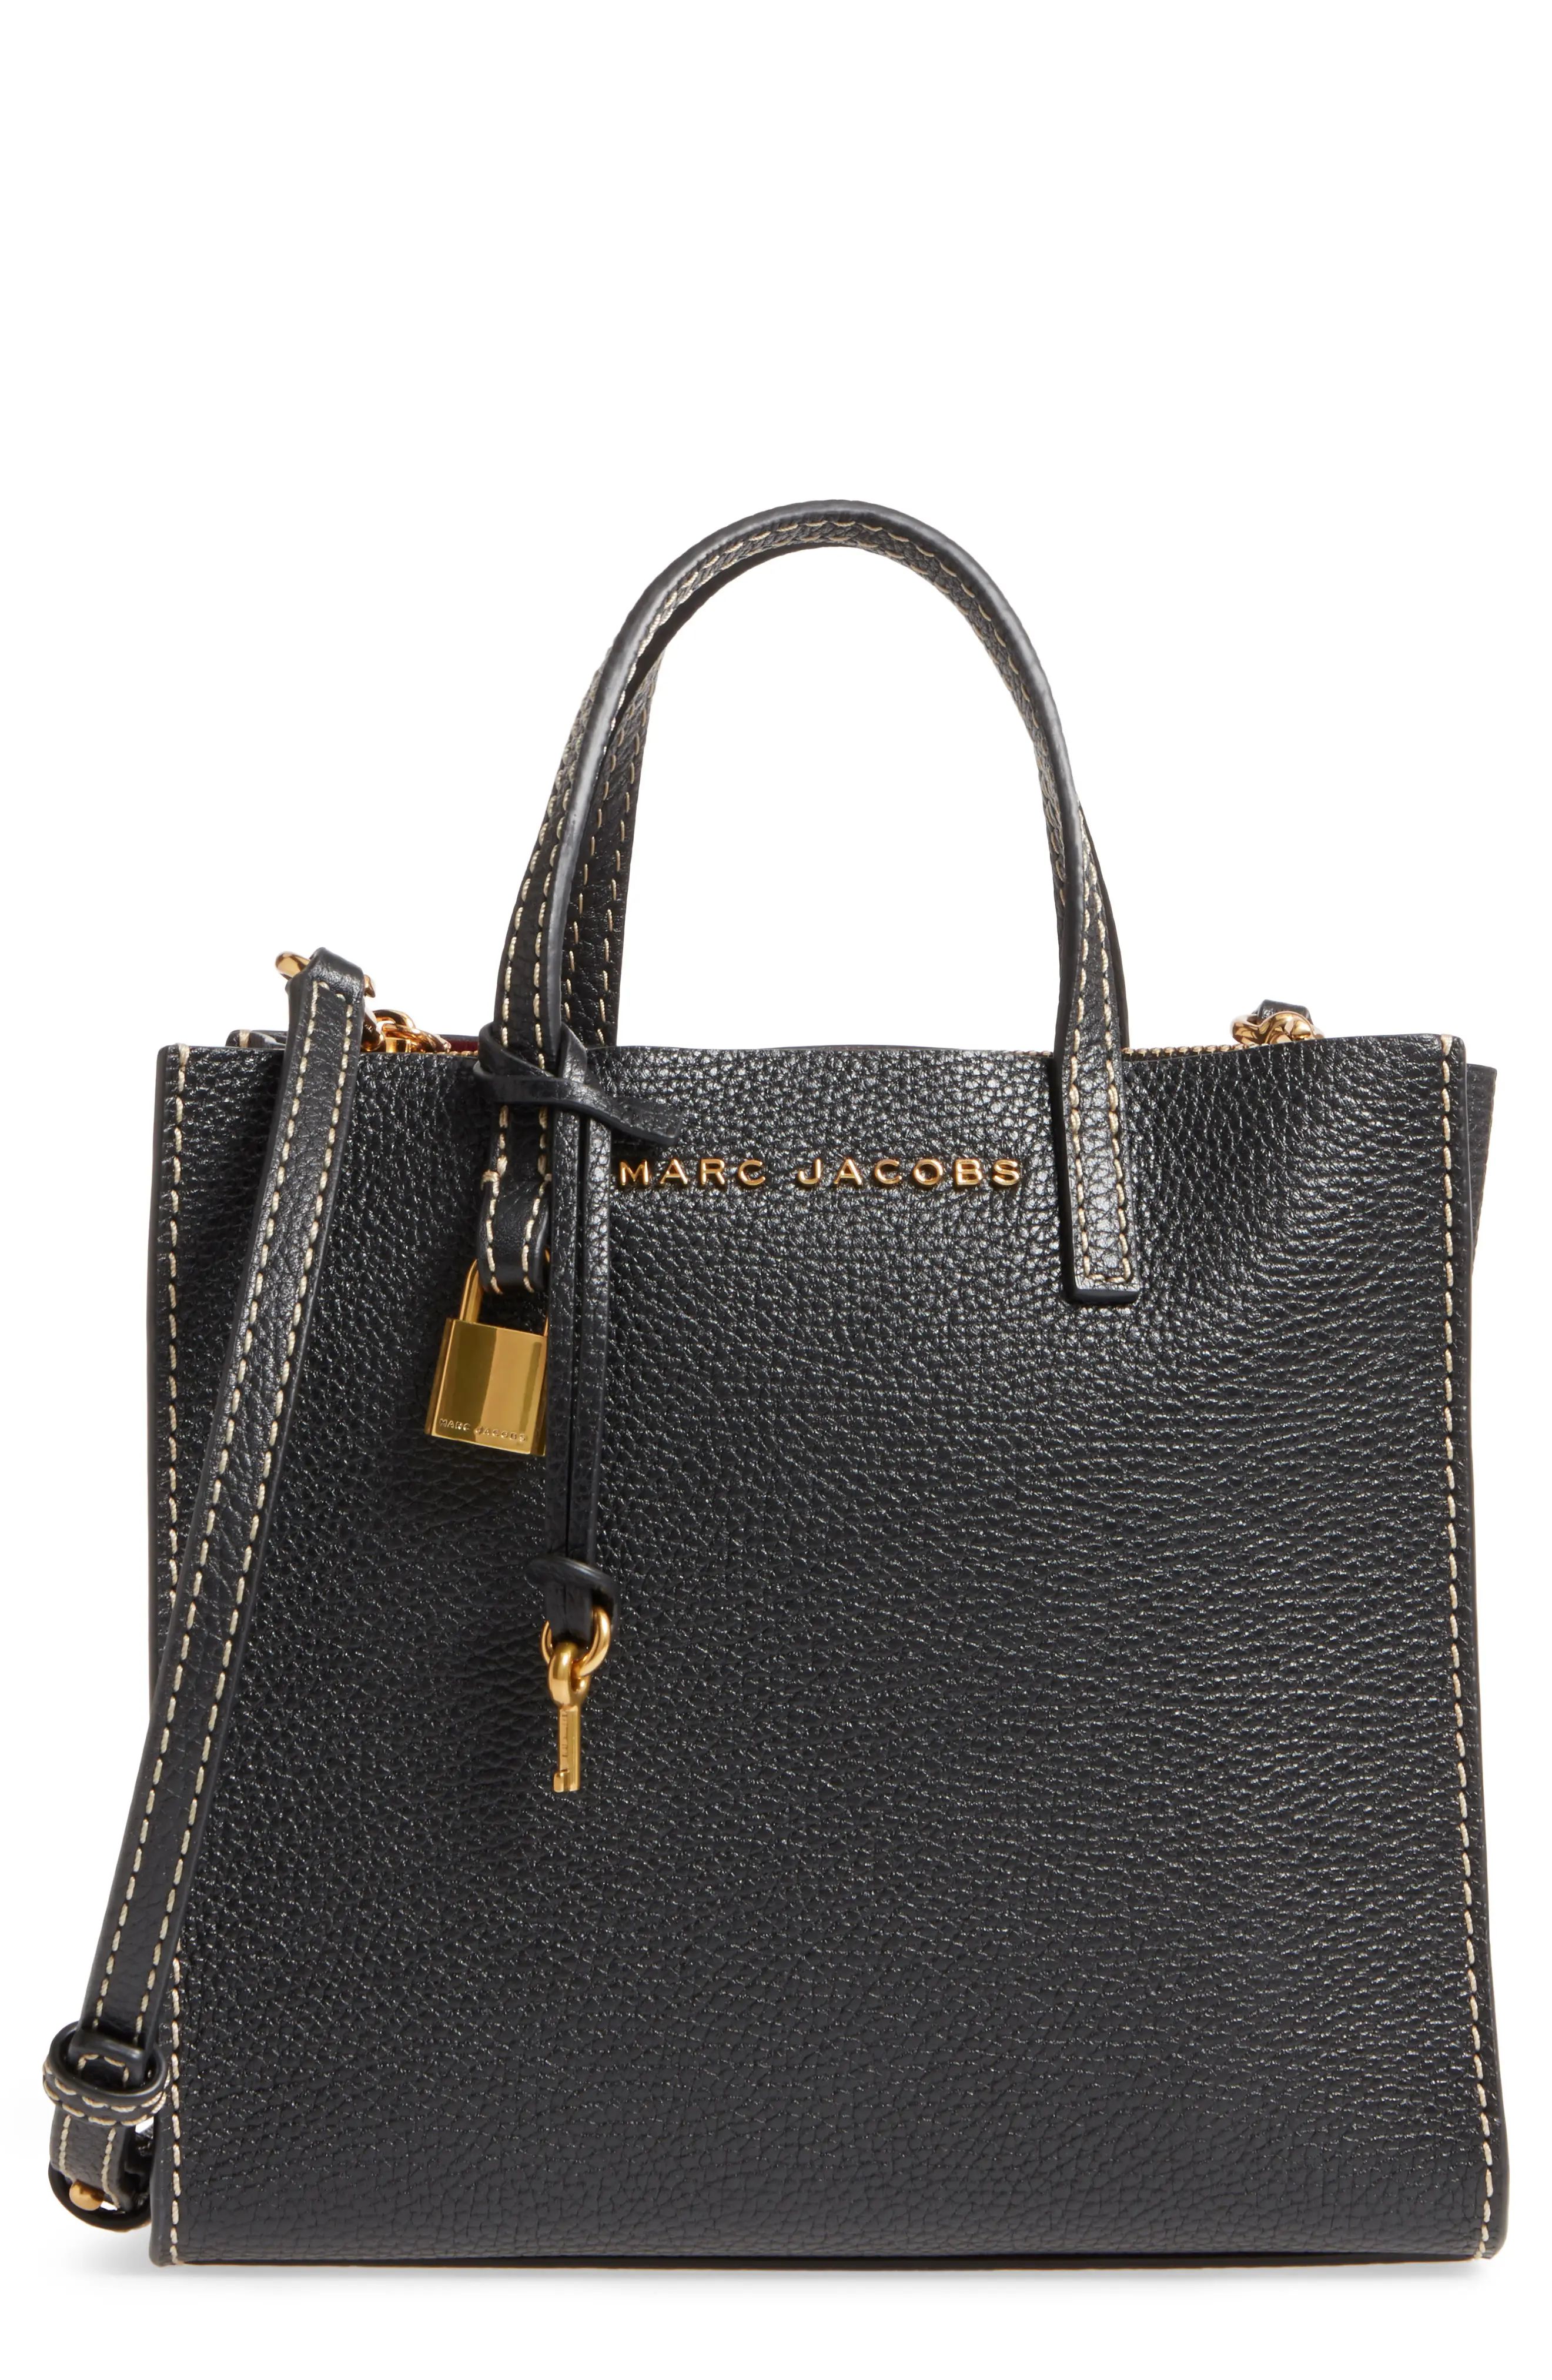 Marc Jacobs The Grind Mini Colorblock Leather Tote - Black | Nordstrom